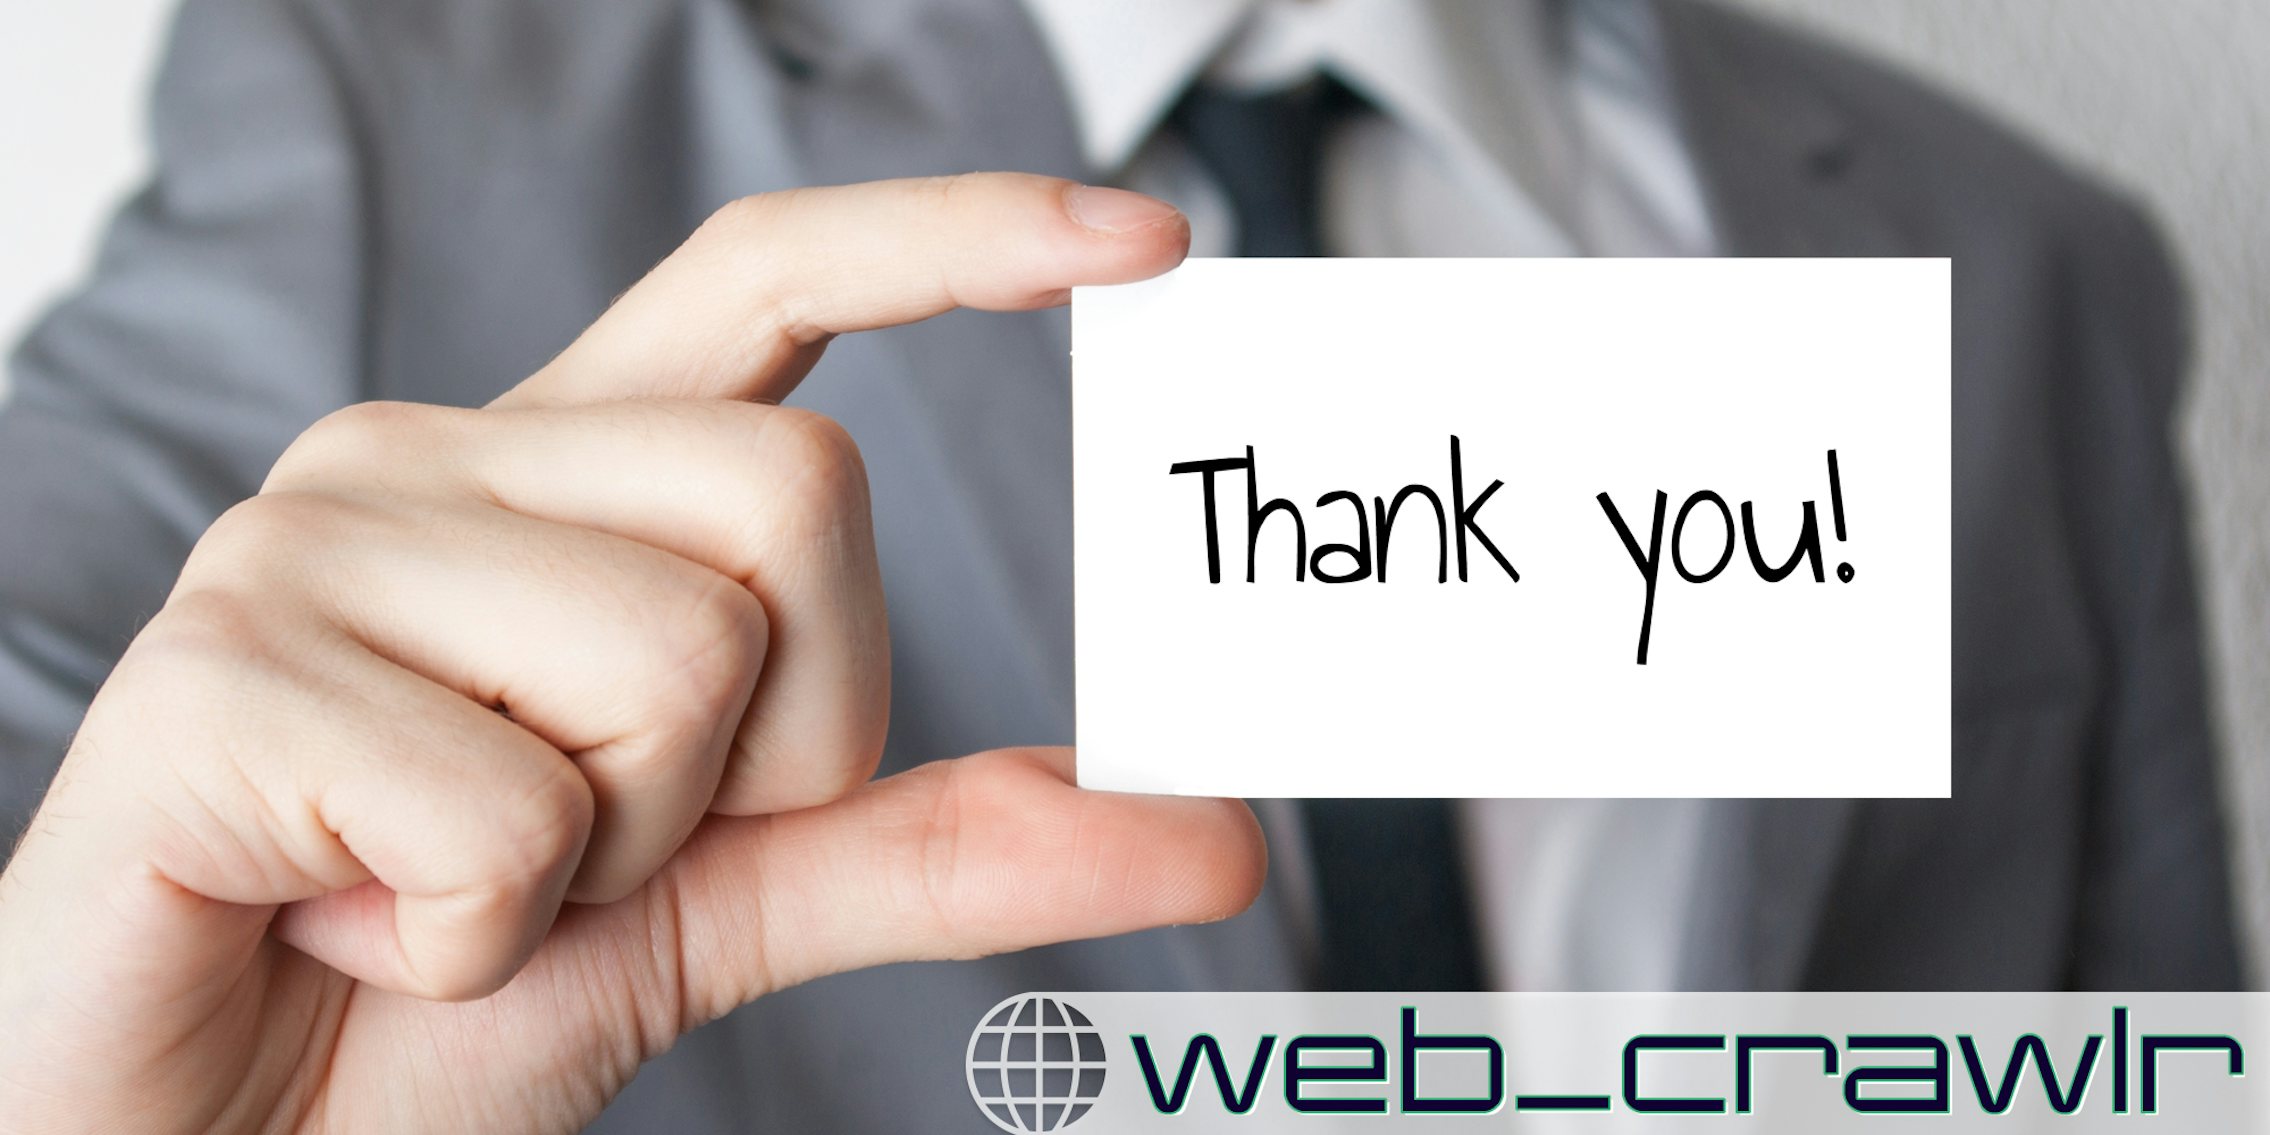 A businessman holding a card that says 'thank you.' The Daily Dot newsletter web_crawlr logo is in the bottom right corner.